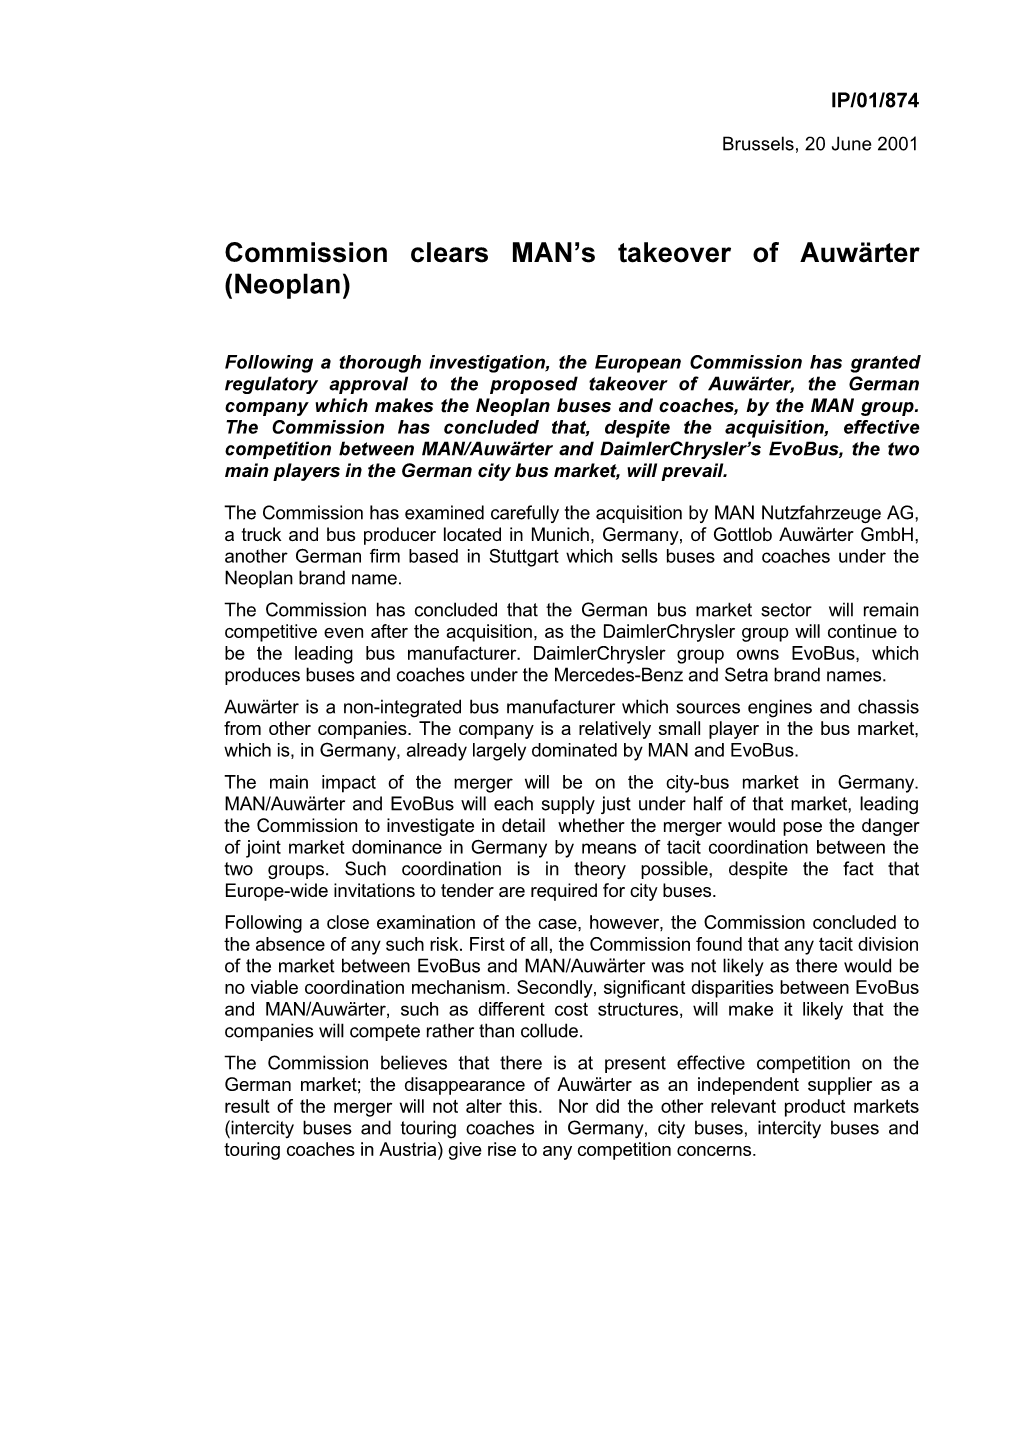 Commission Clears MAN¶S Takeover of Auwärter (Neoplan)